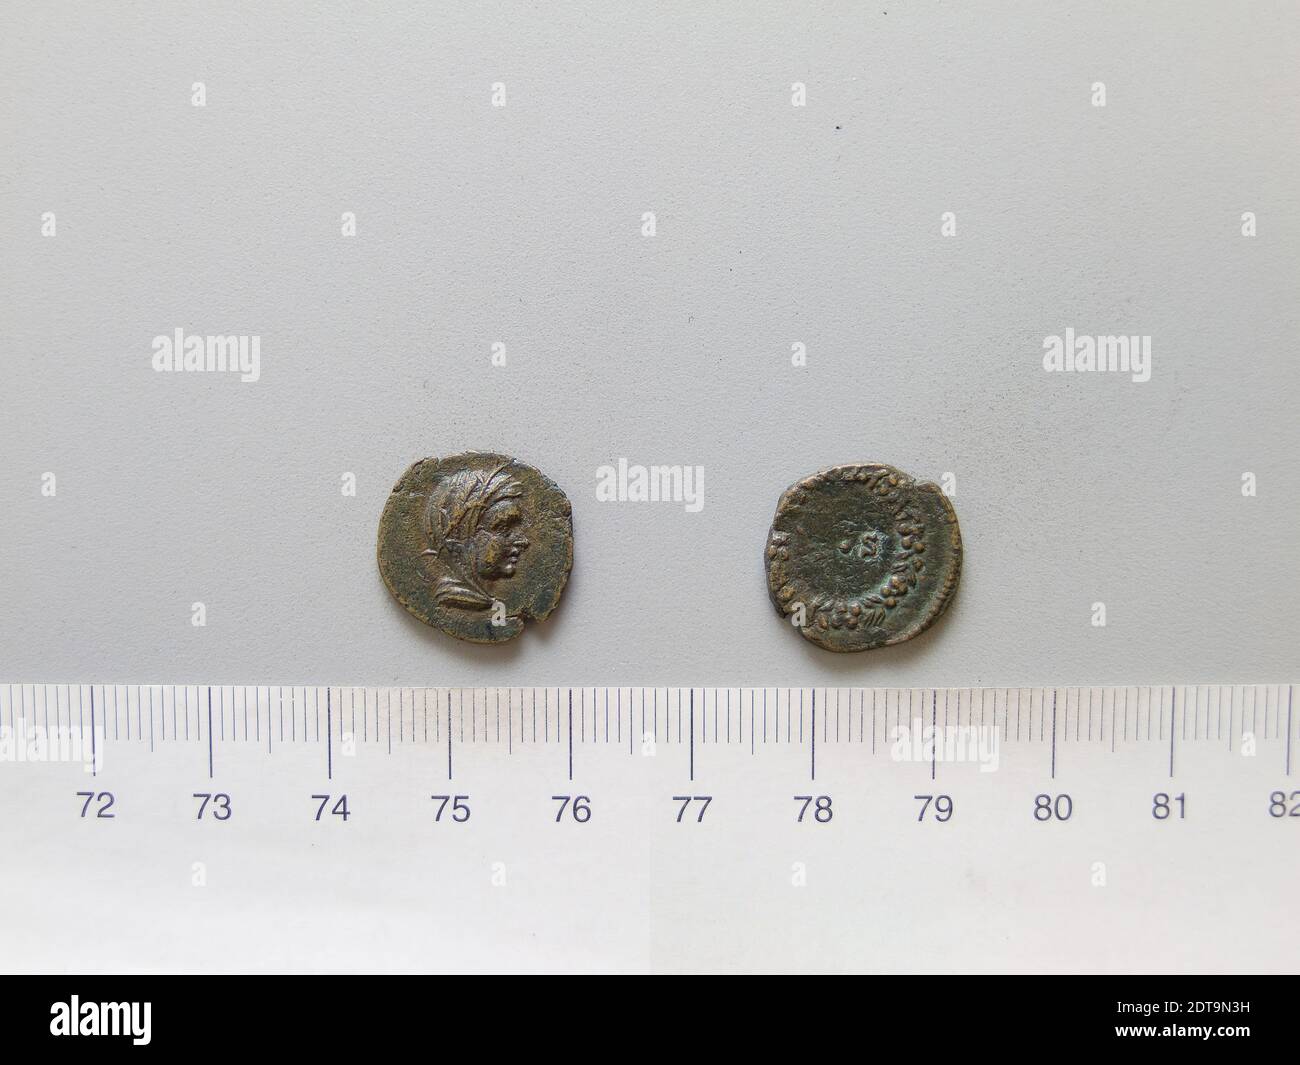 Mint: Rome, Coin from Rome, 2nd century A.D., Copper, 2.23 g, 6:00, 16 mm, Made in Rome, Roman, 2nd century A.D., Numismatics Stock Photo